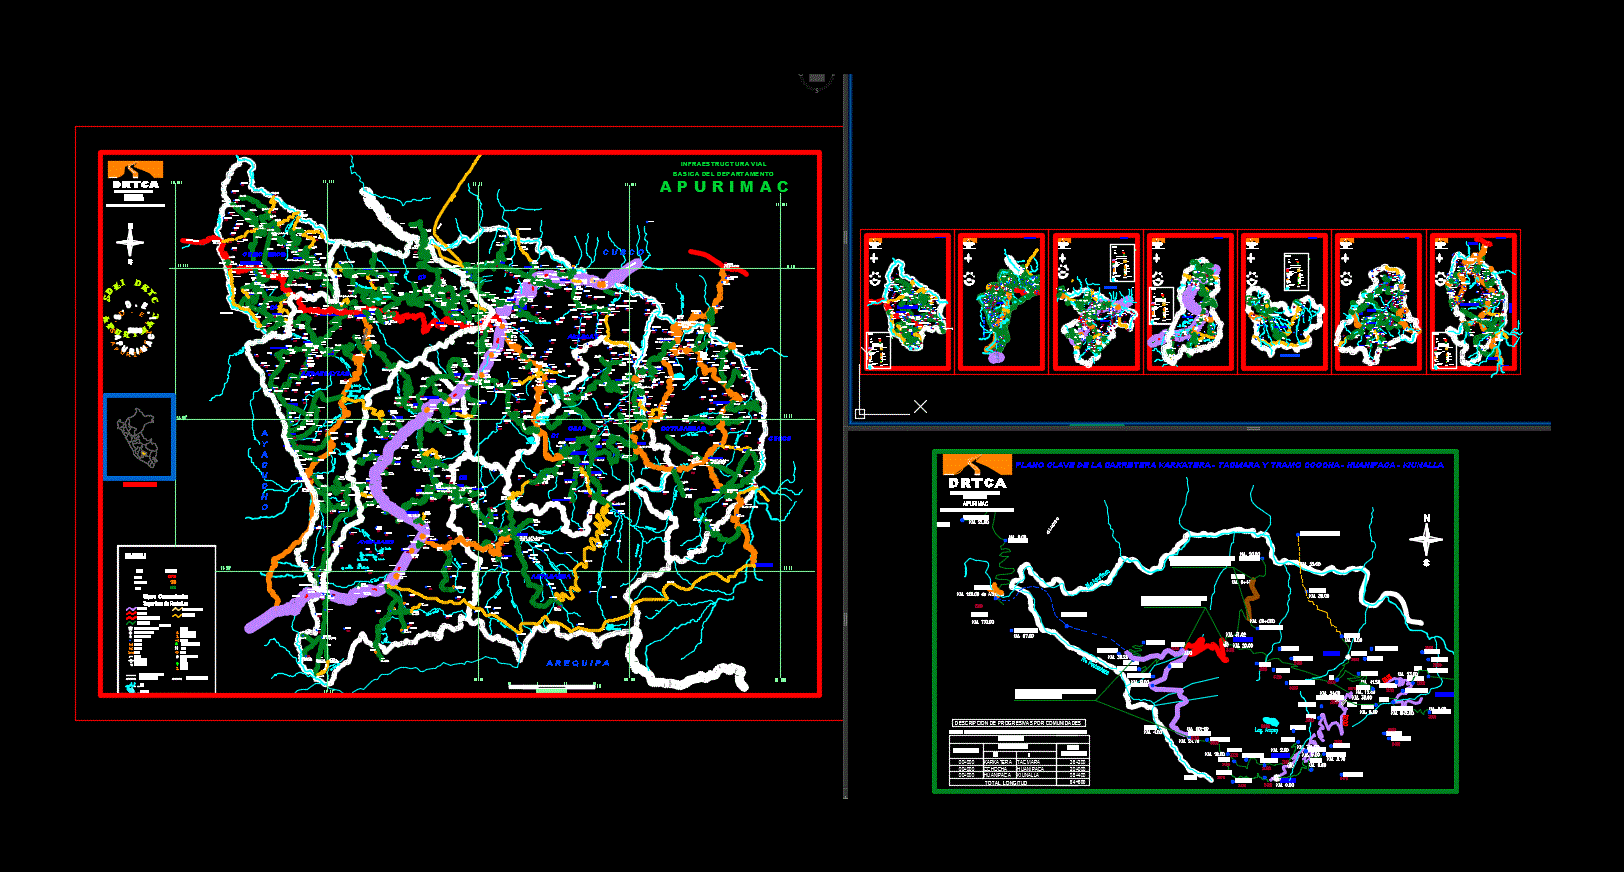 Road network - roads of the 7 provinces of the department of apurimac